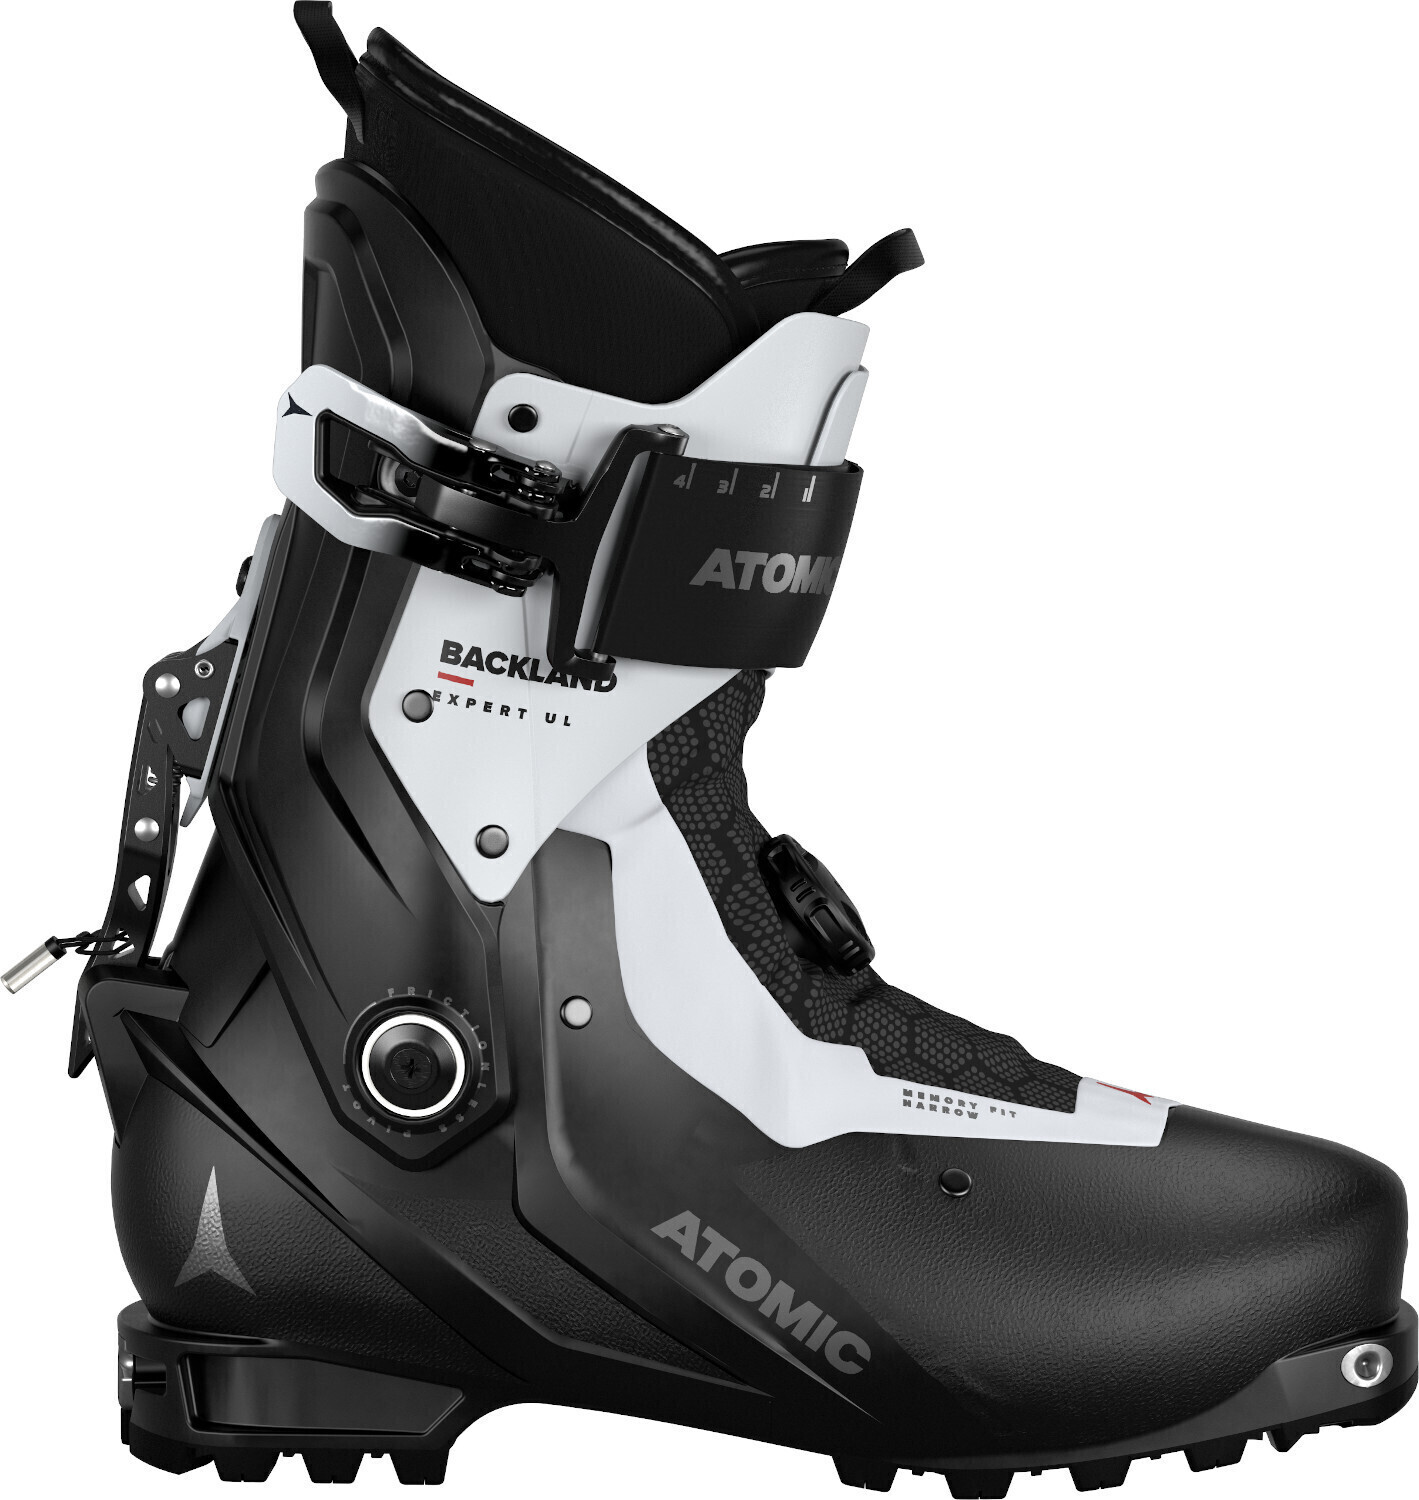 Buy Atomic Backland Expert Ul Woman (AE502756022X) black from £298.99  (Today) – Best Deals on